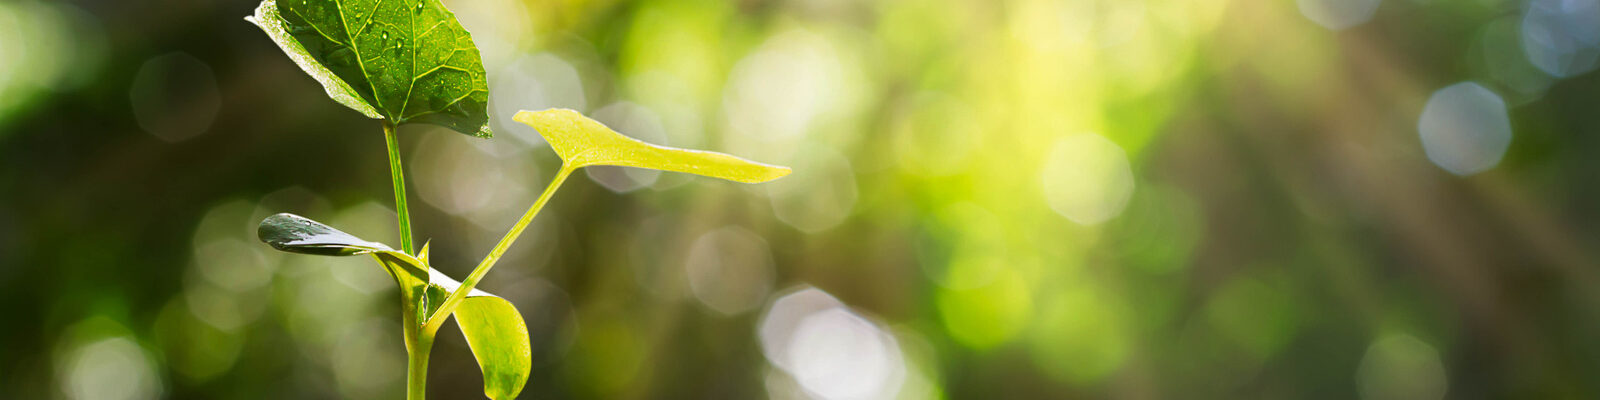 Sprout on blurred green bokeh with soft sunlight  background, environmental concept